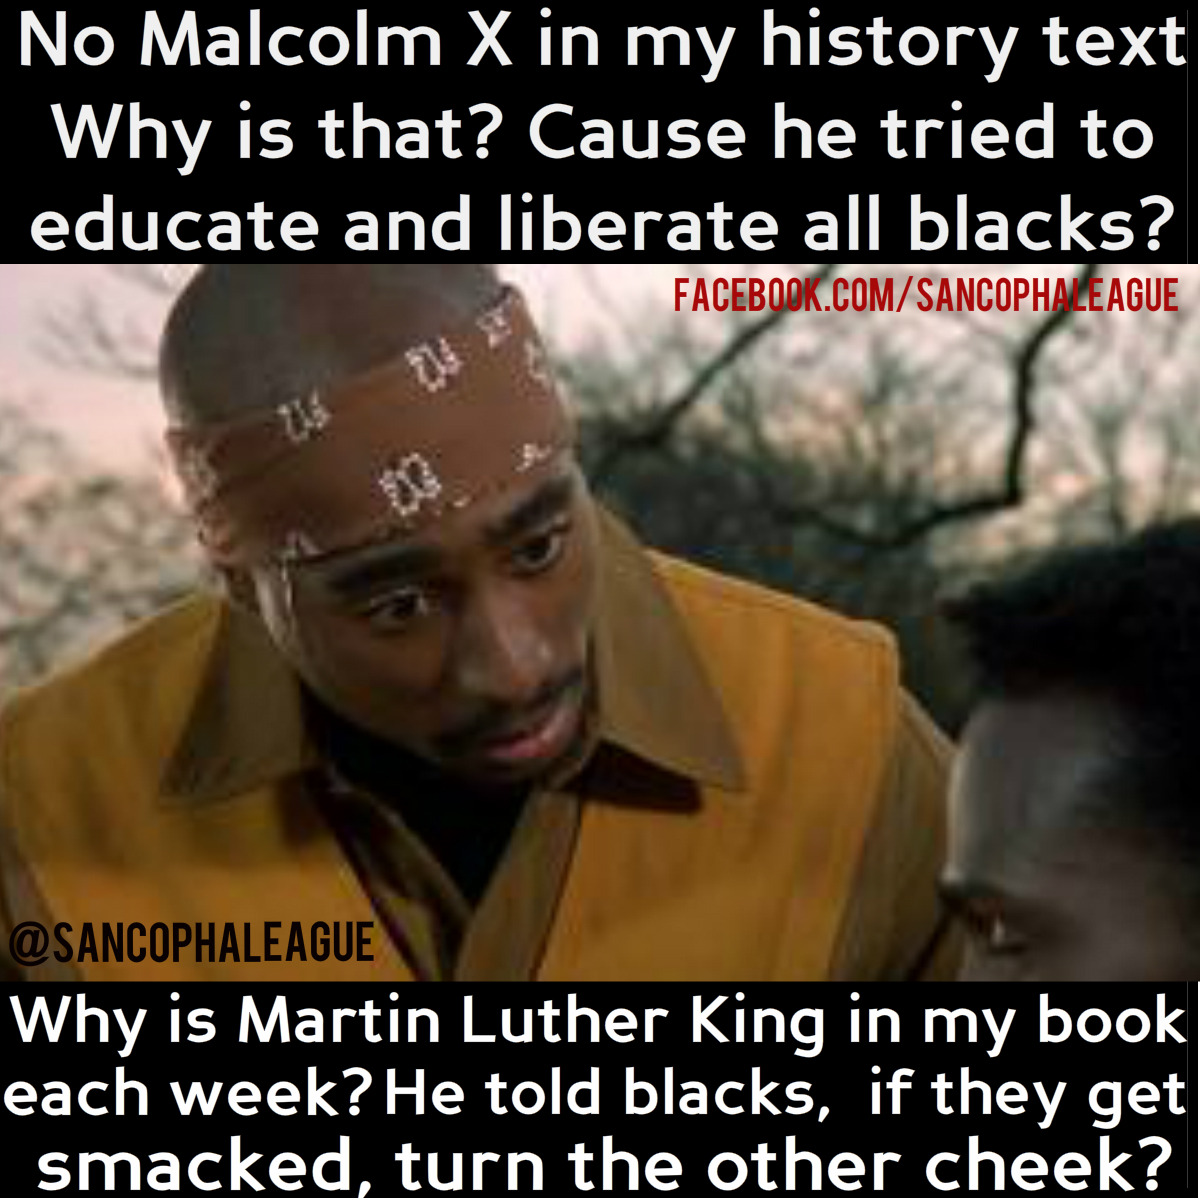 Compare and contrast Martin Luther King and Malcolm X.